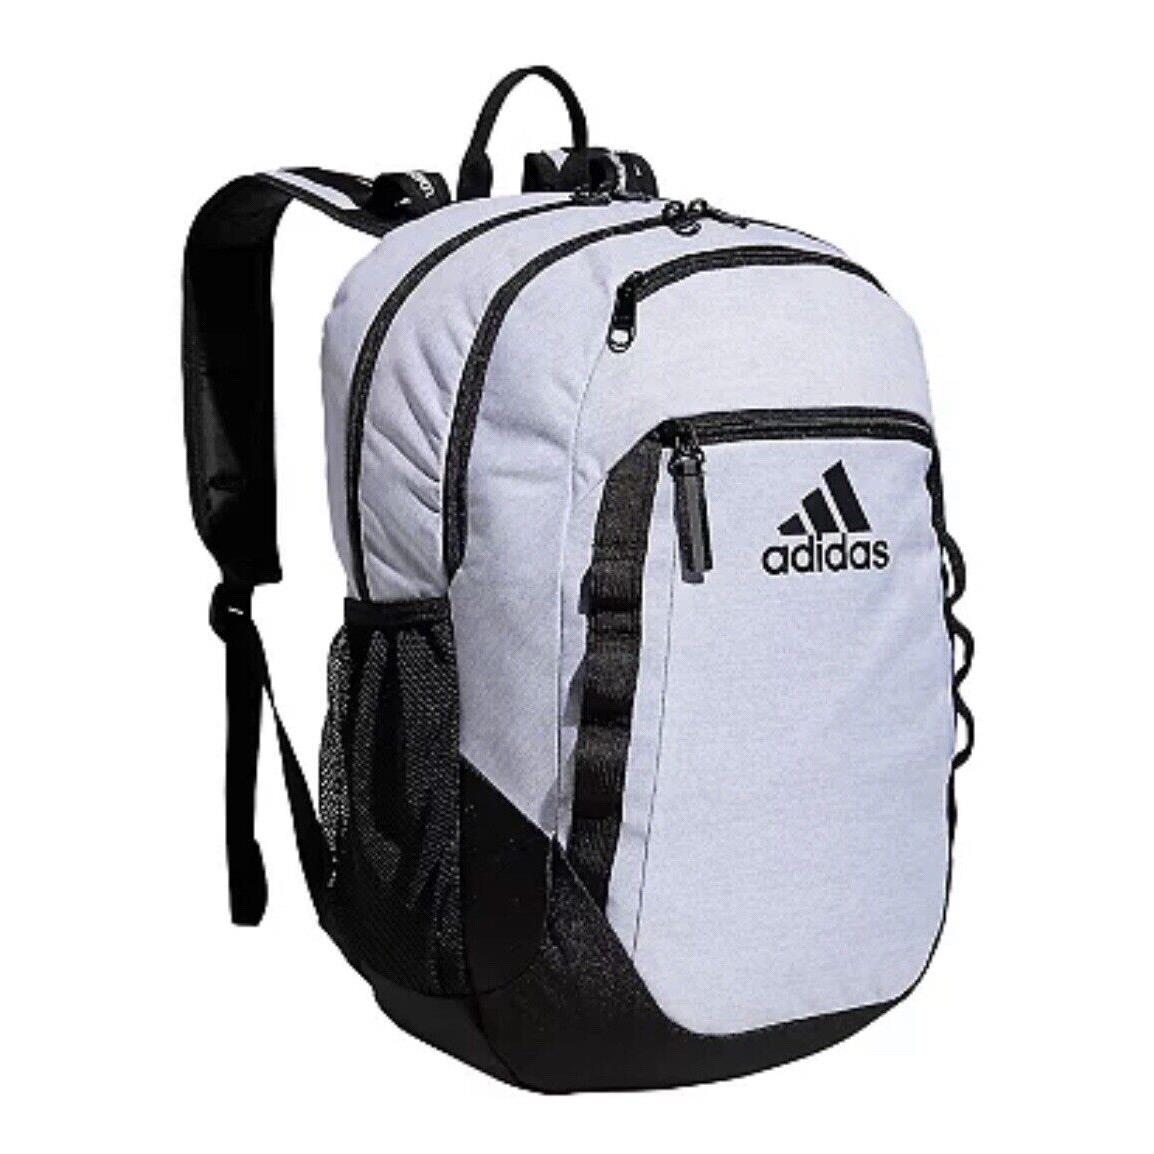 Adidas Excel 6 Backpack 19 Full Size Gray Black